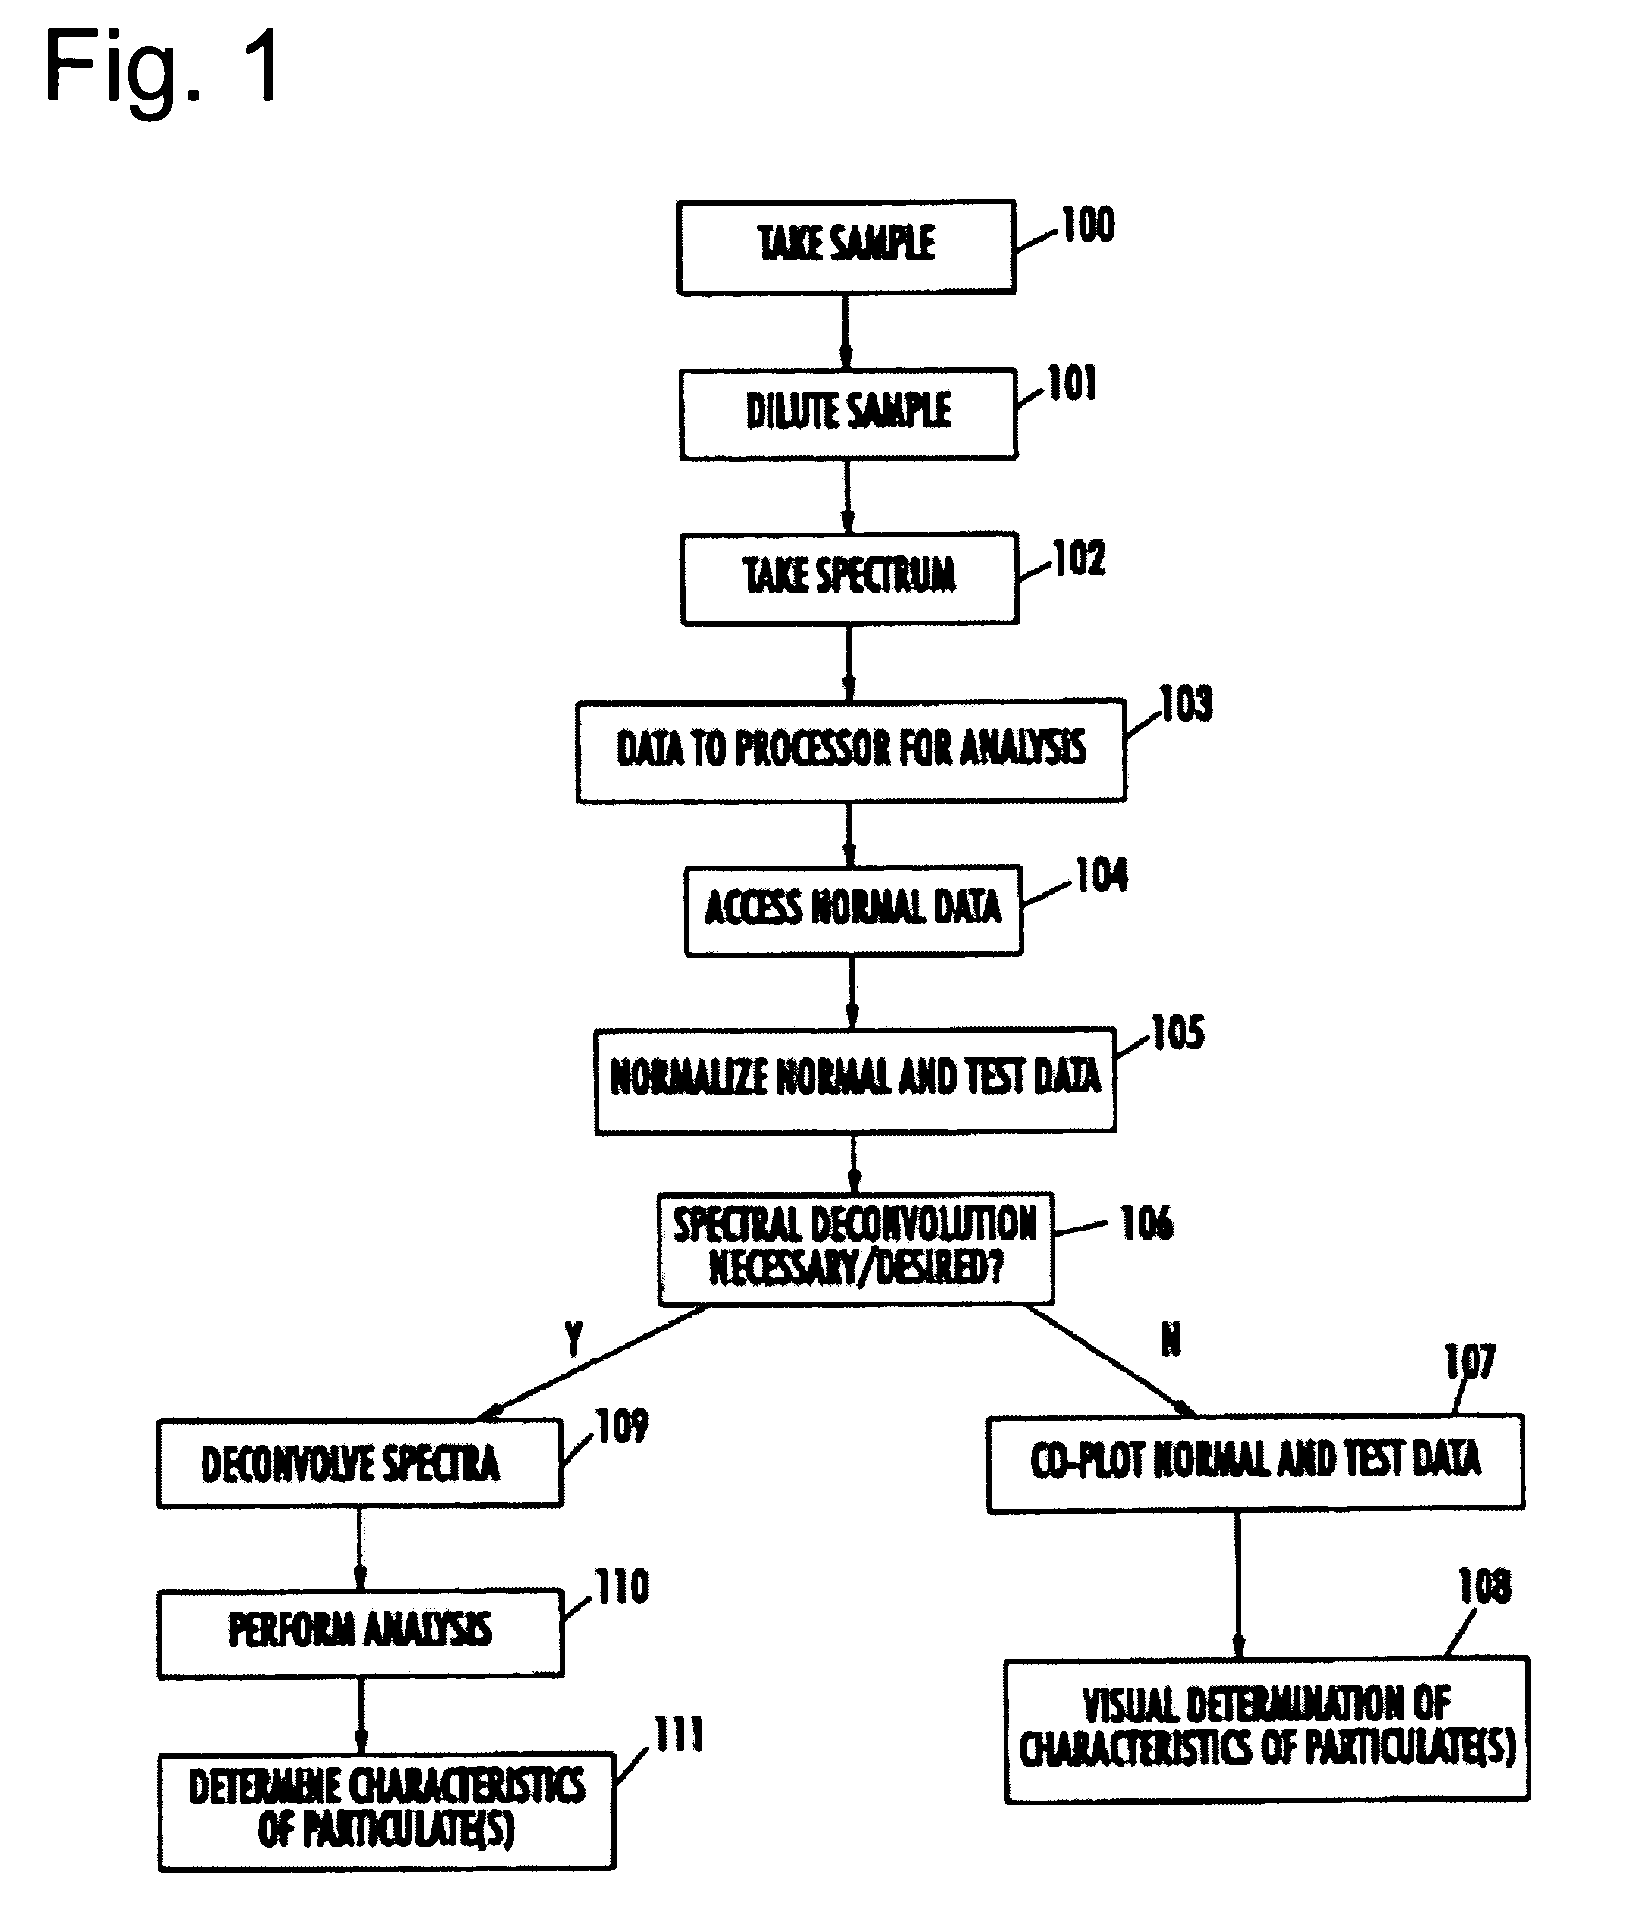 Spectrophotometric system and method for the identification and characterization of a particle in a bodily fluid